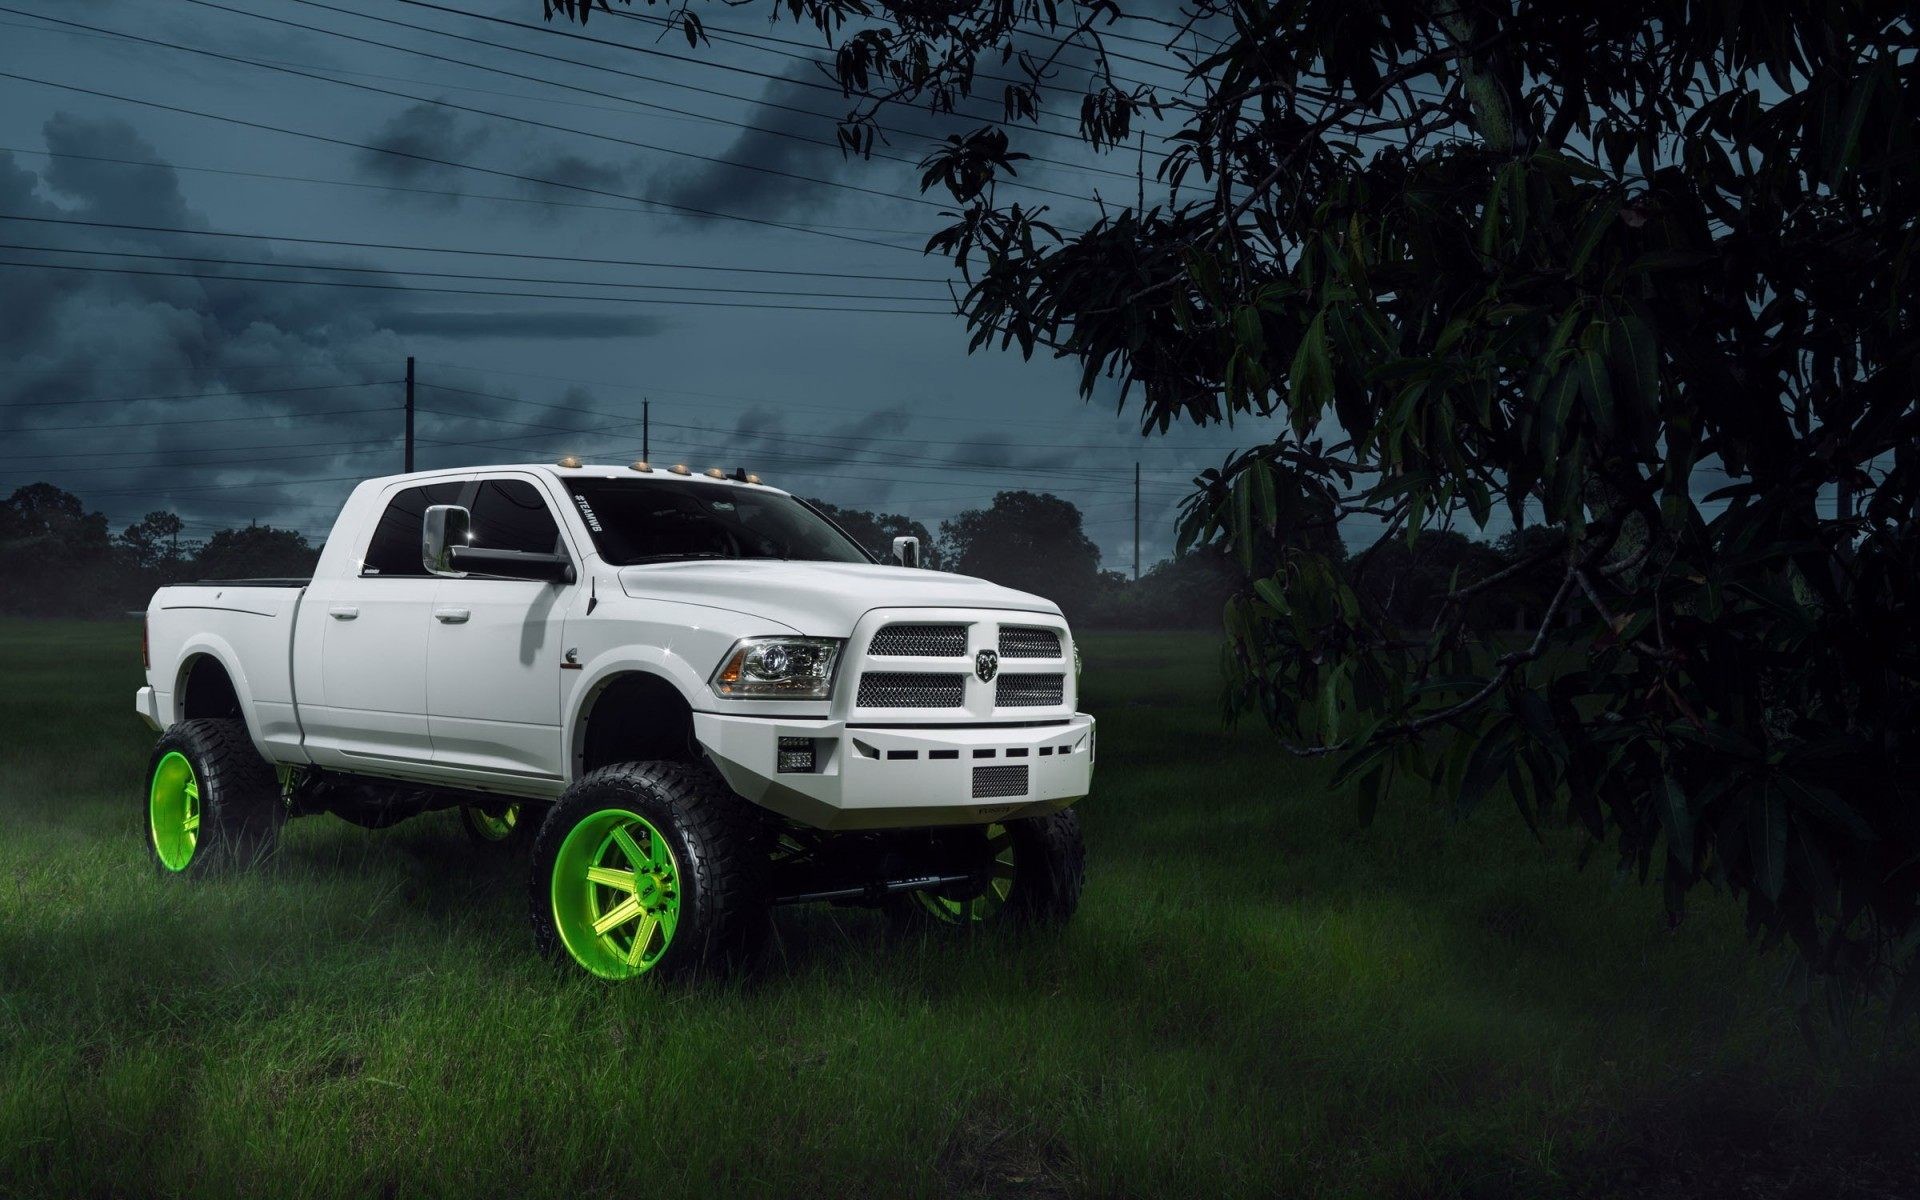 Pickup Truck Wallpapers Images Backgrounds Photos and Pictures